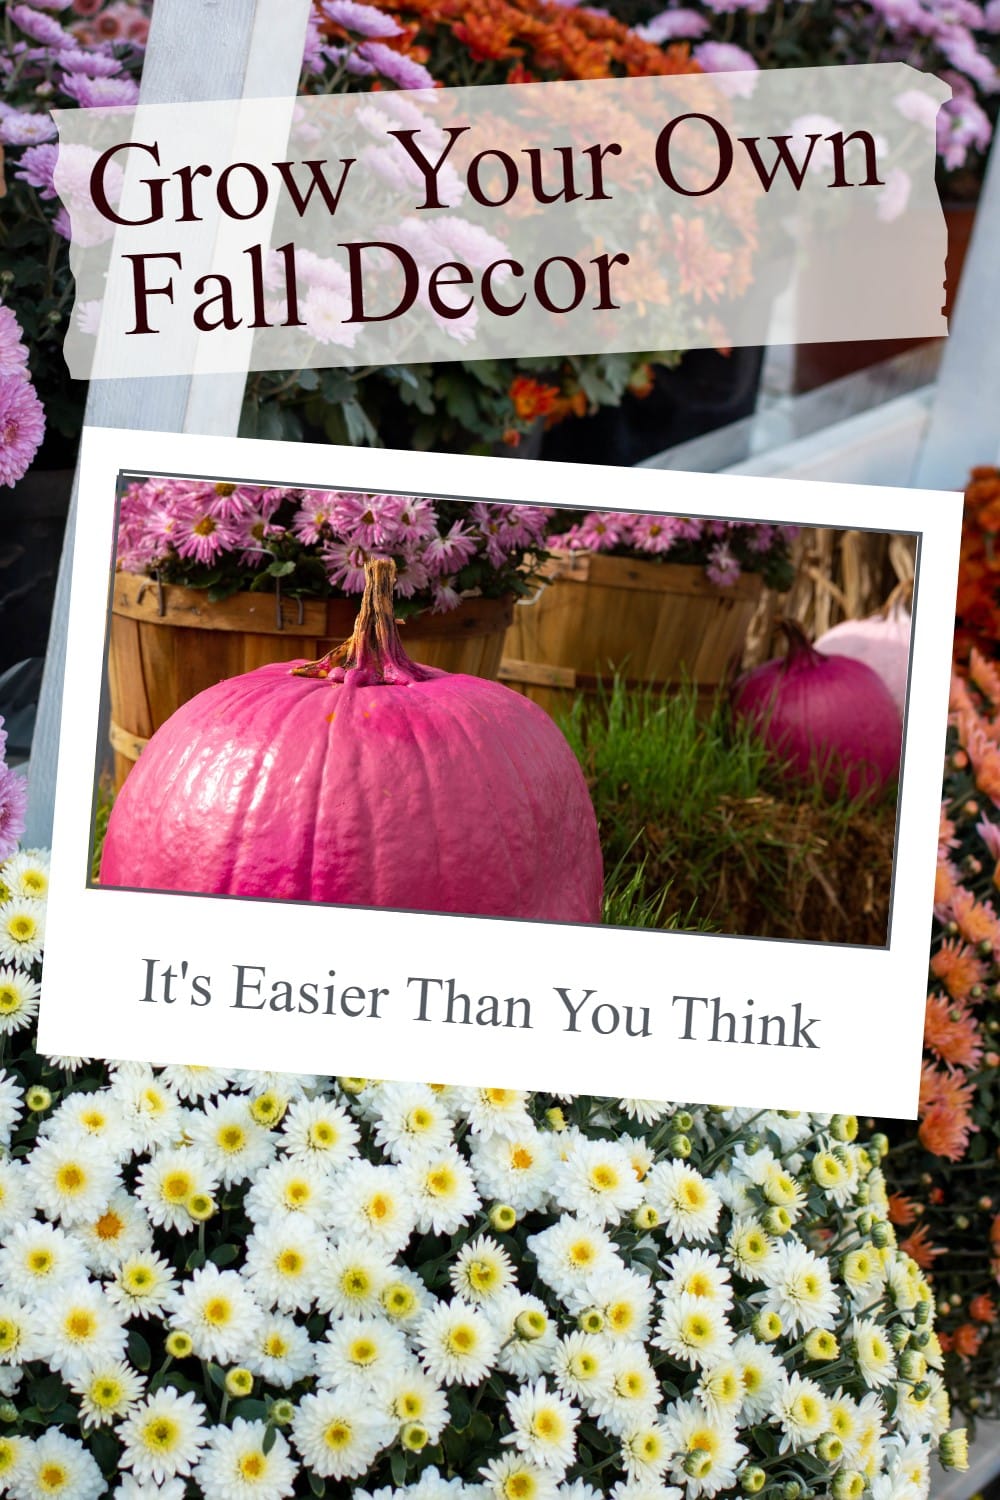 Grow your own Fall porch decor! Think pumpkins, mums, acorns and more. Tips for Autumn decor ideas using your own green thumb. via @repurposedlife